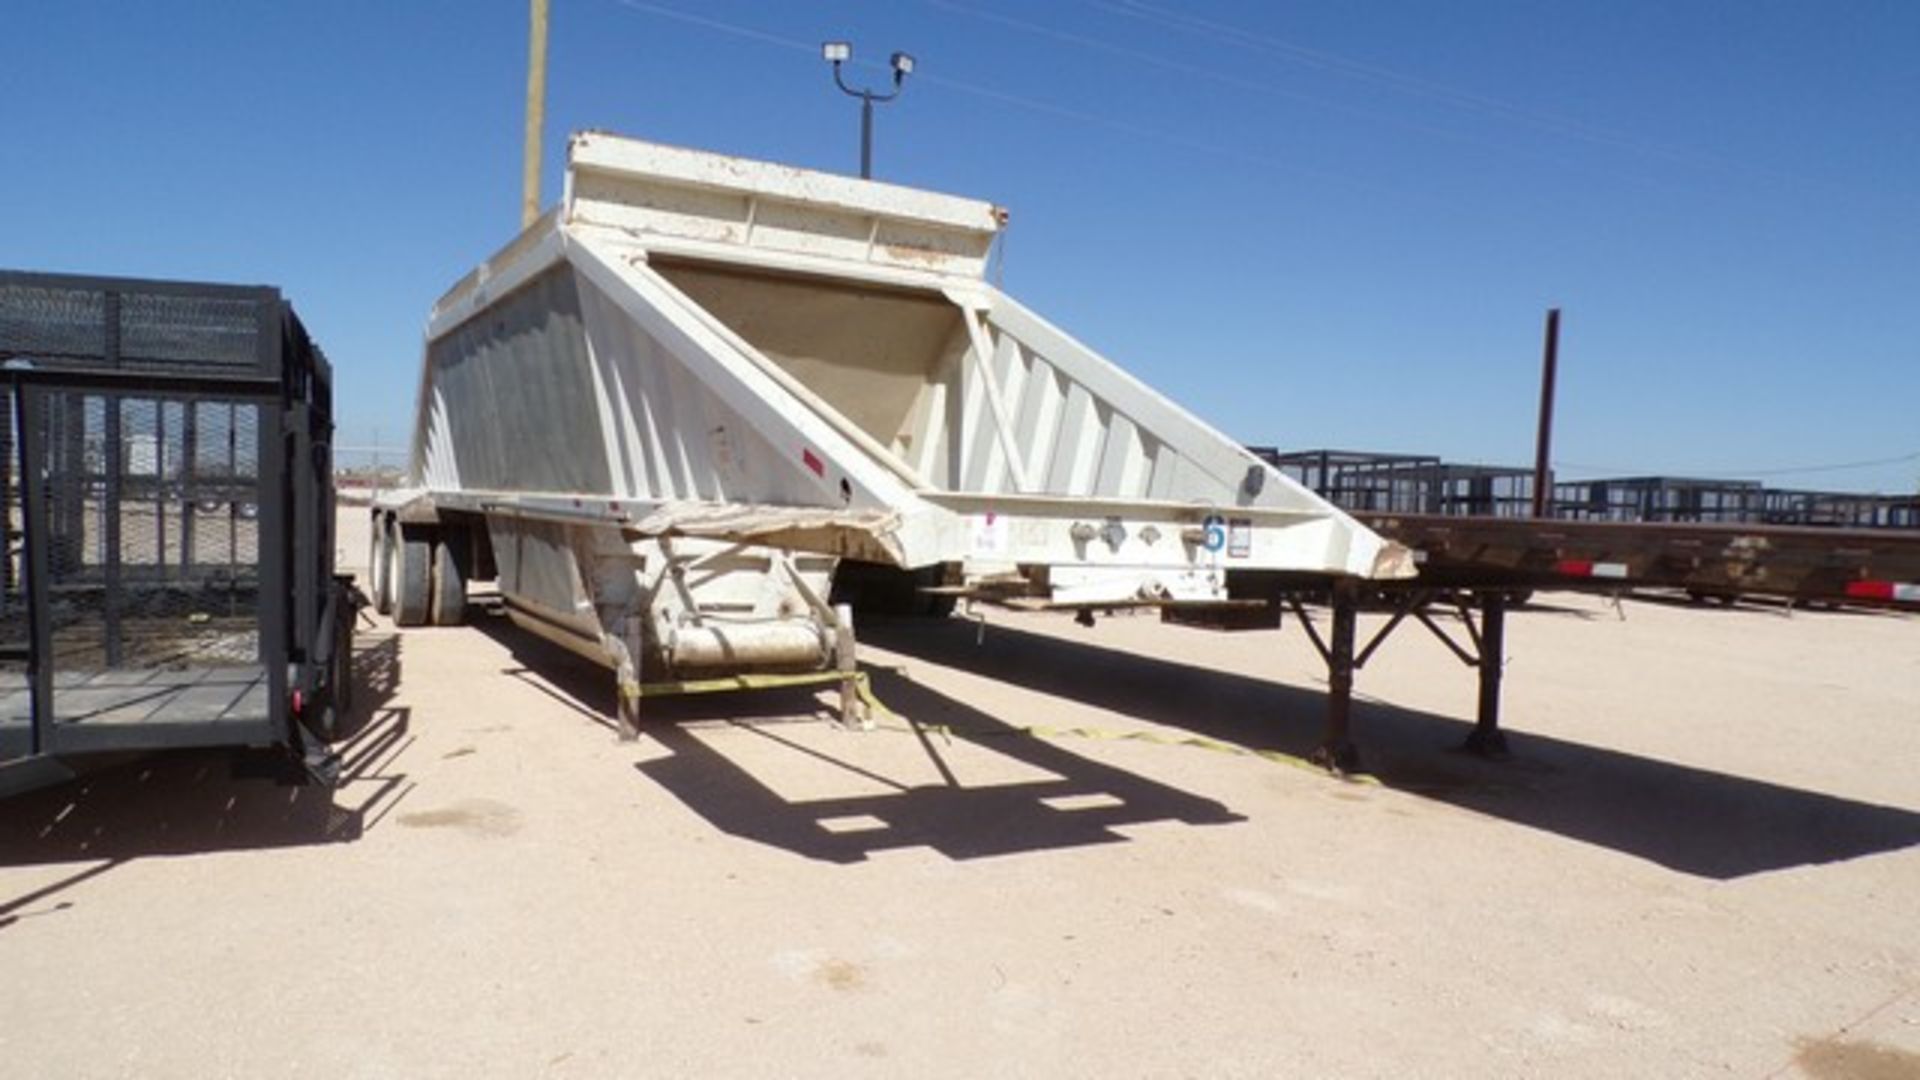 Located in YARD 1 - Midland, TX (2355) (X) 2007 CONSTRUCTION TRAILER SPECIALIST T/A BDT40 BELLY DUMP